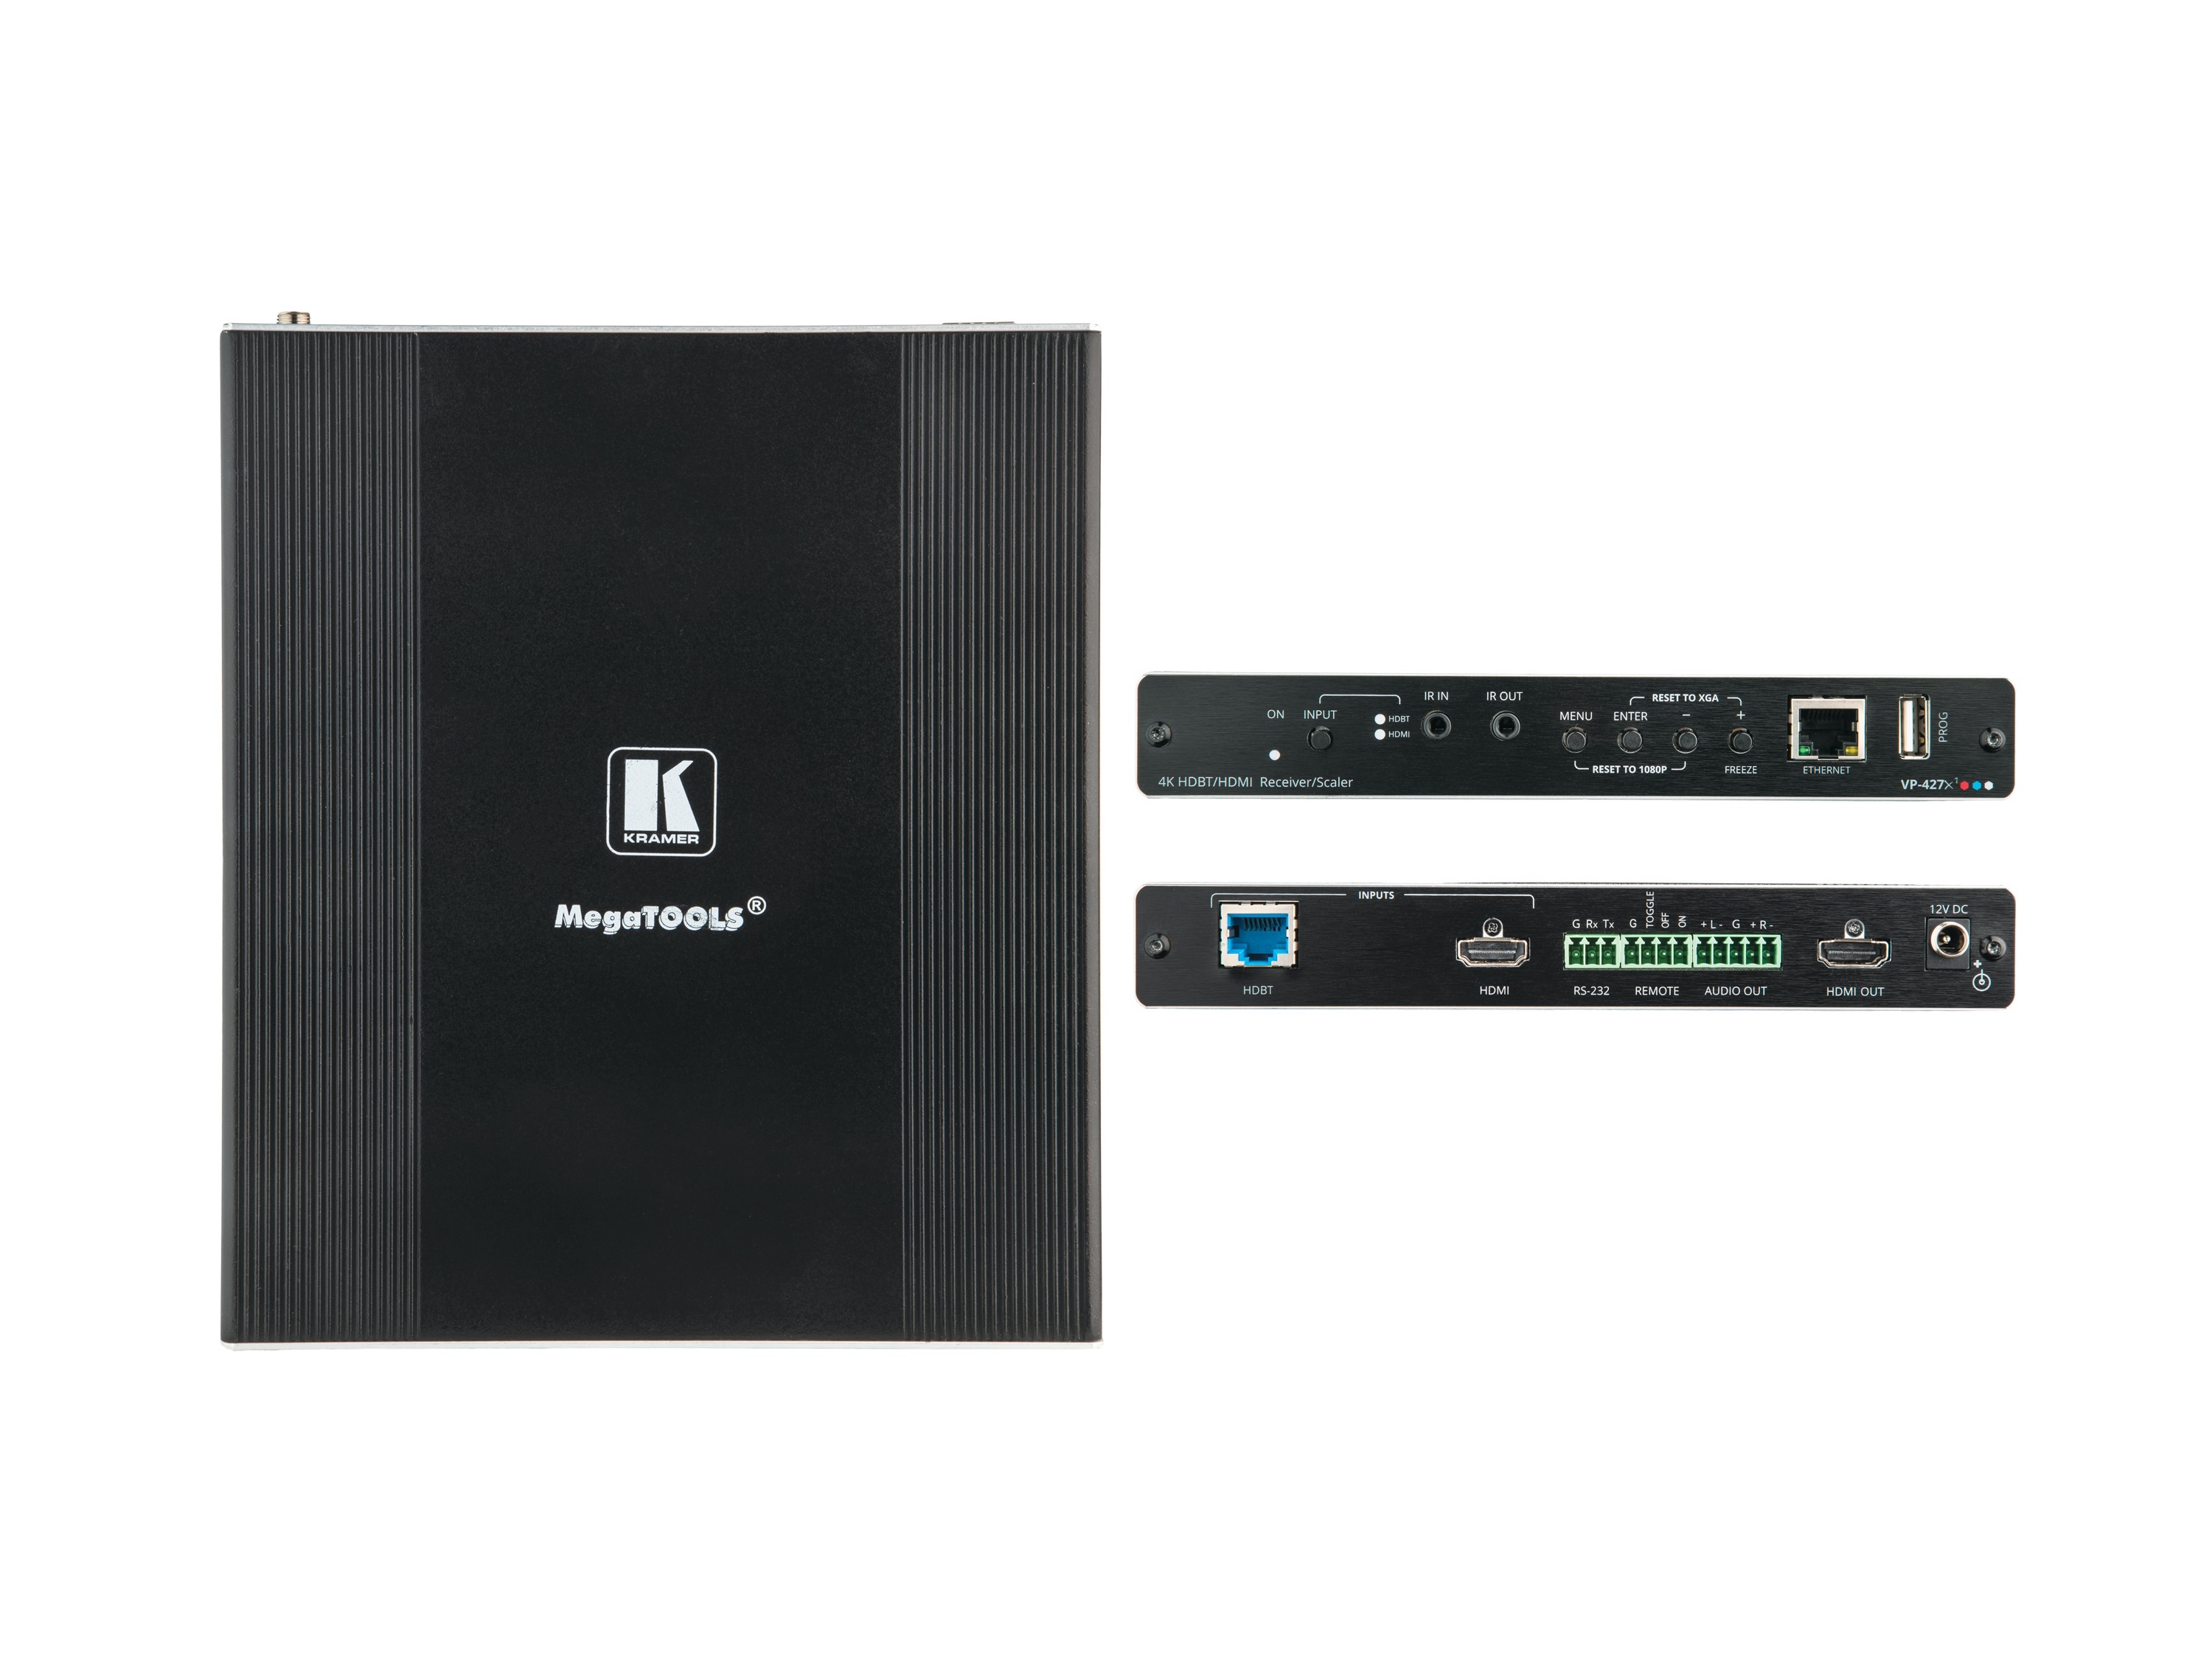 VP-427X1 4K HDR HDBT Receiver/Scaler Tool with HDBaseT and HDMI Input by Kramer